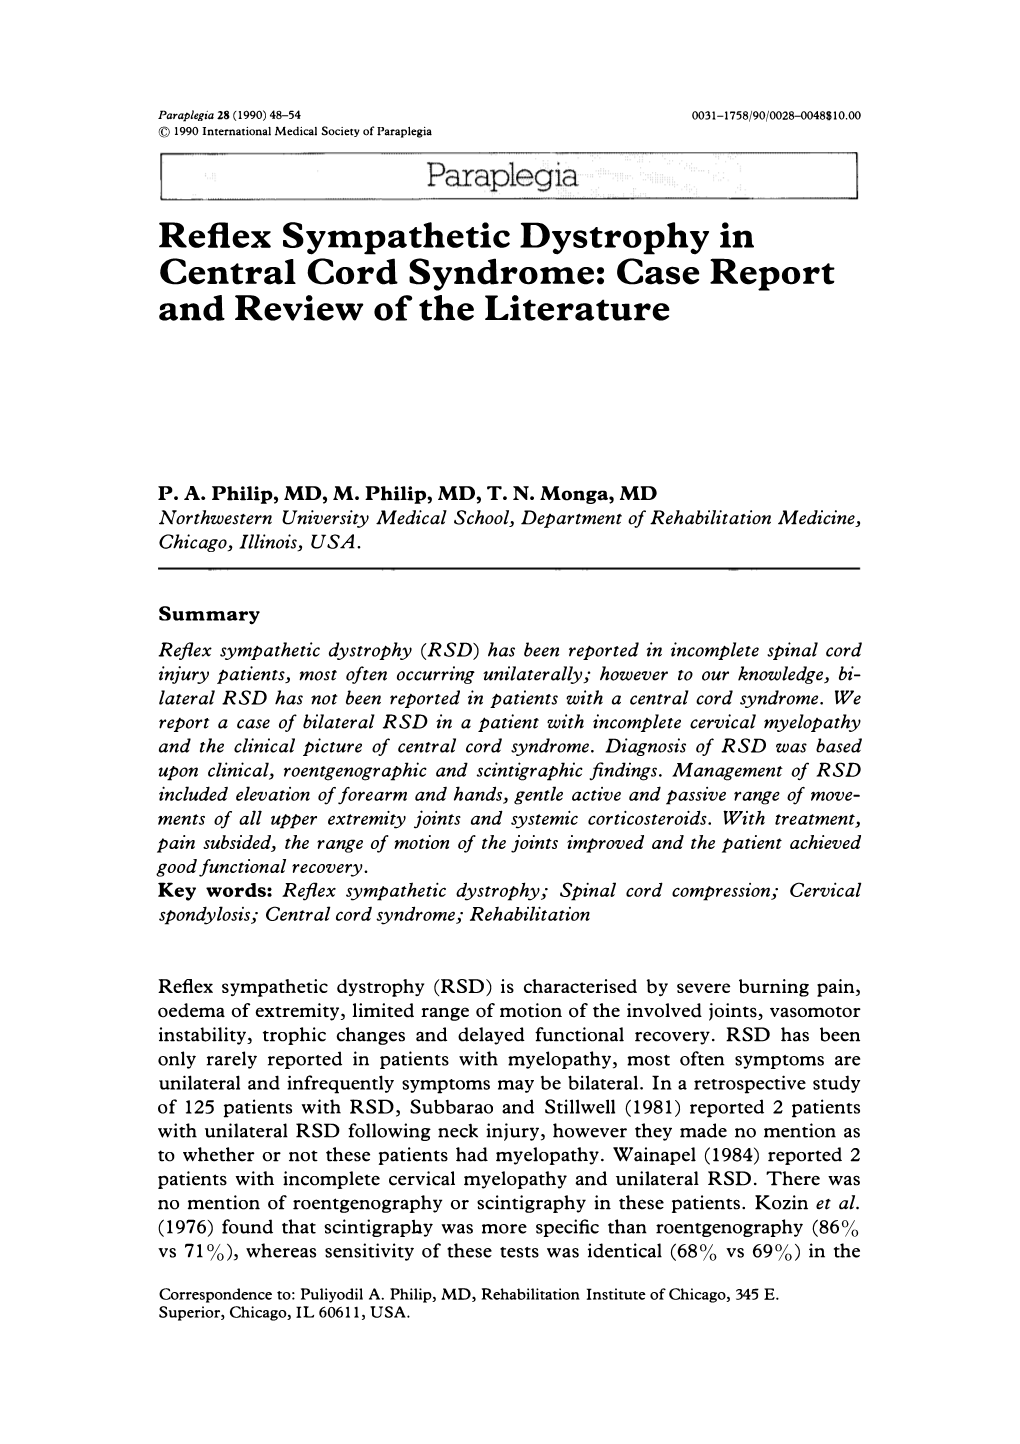 Reflex Sympathetic Dystrophy in Central Cord Syndrome: Case Report and Review of the Literature